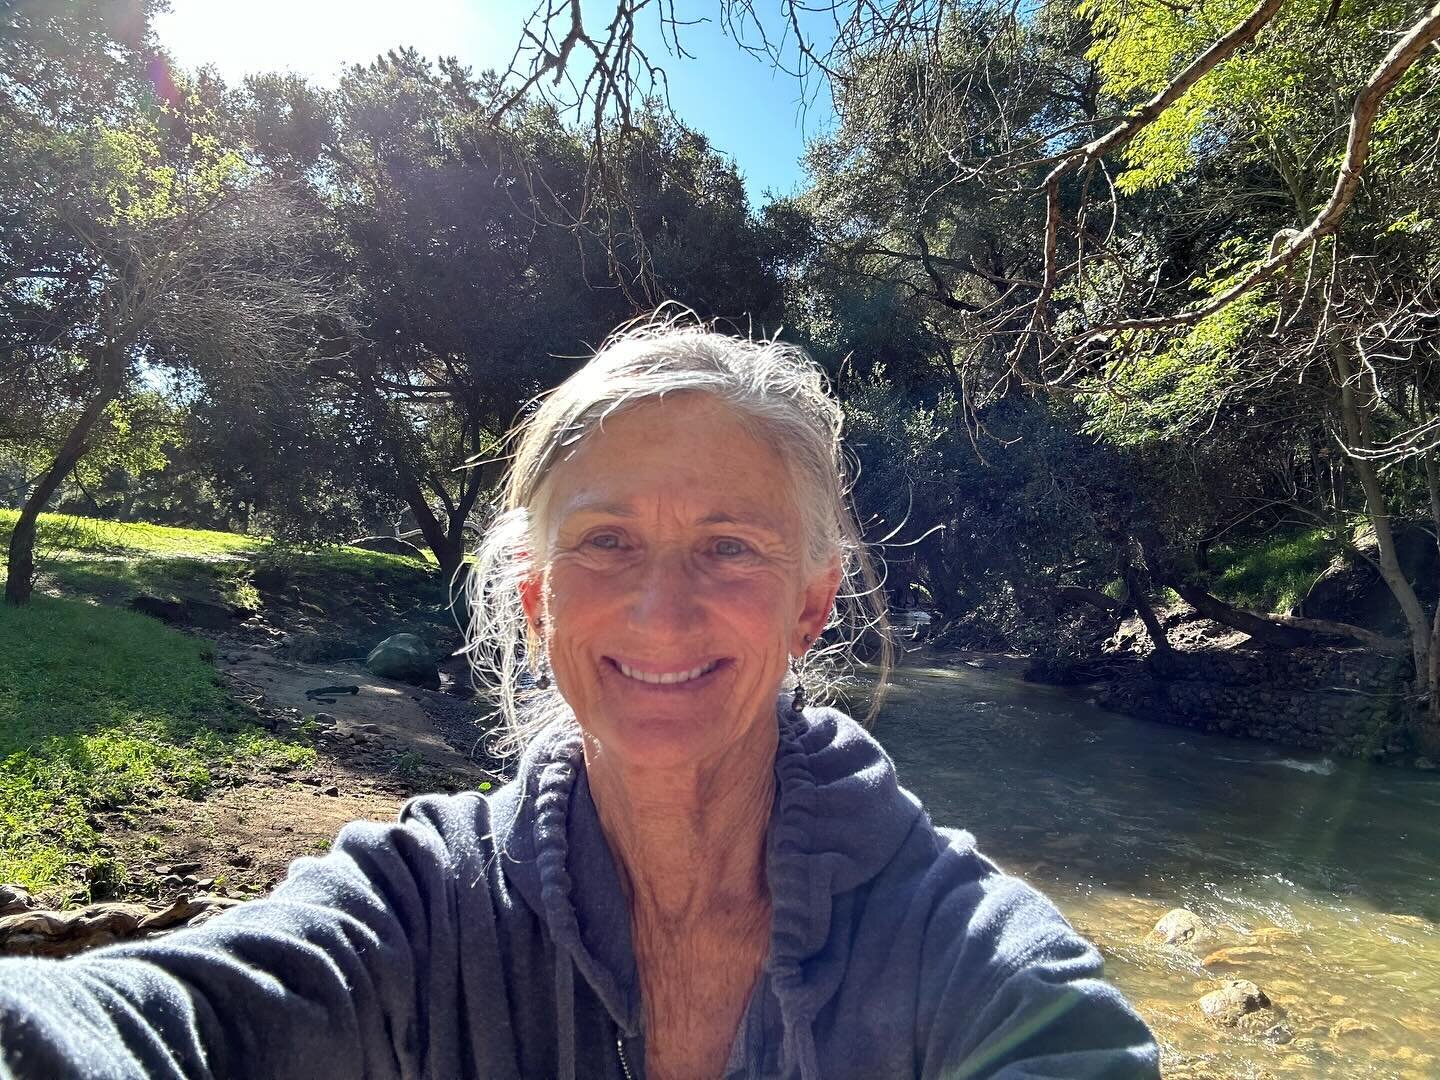 Gratitude galore with the sounds of creeks flowing and lush green ground. I've always wanted to live in a town with a year round creek running through it. I hope you are getting outside and enjoying simple pleasures, perhaps a picnic at the park! 
#g